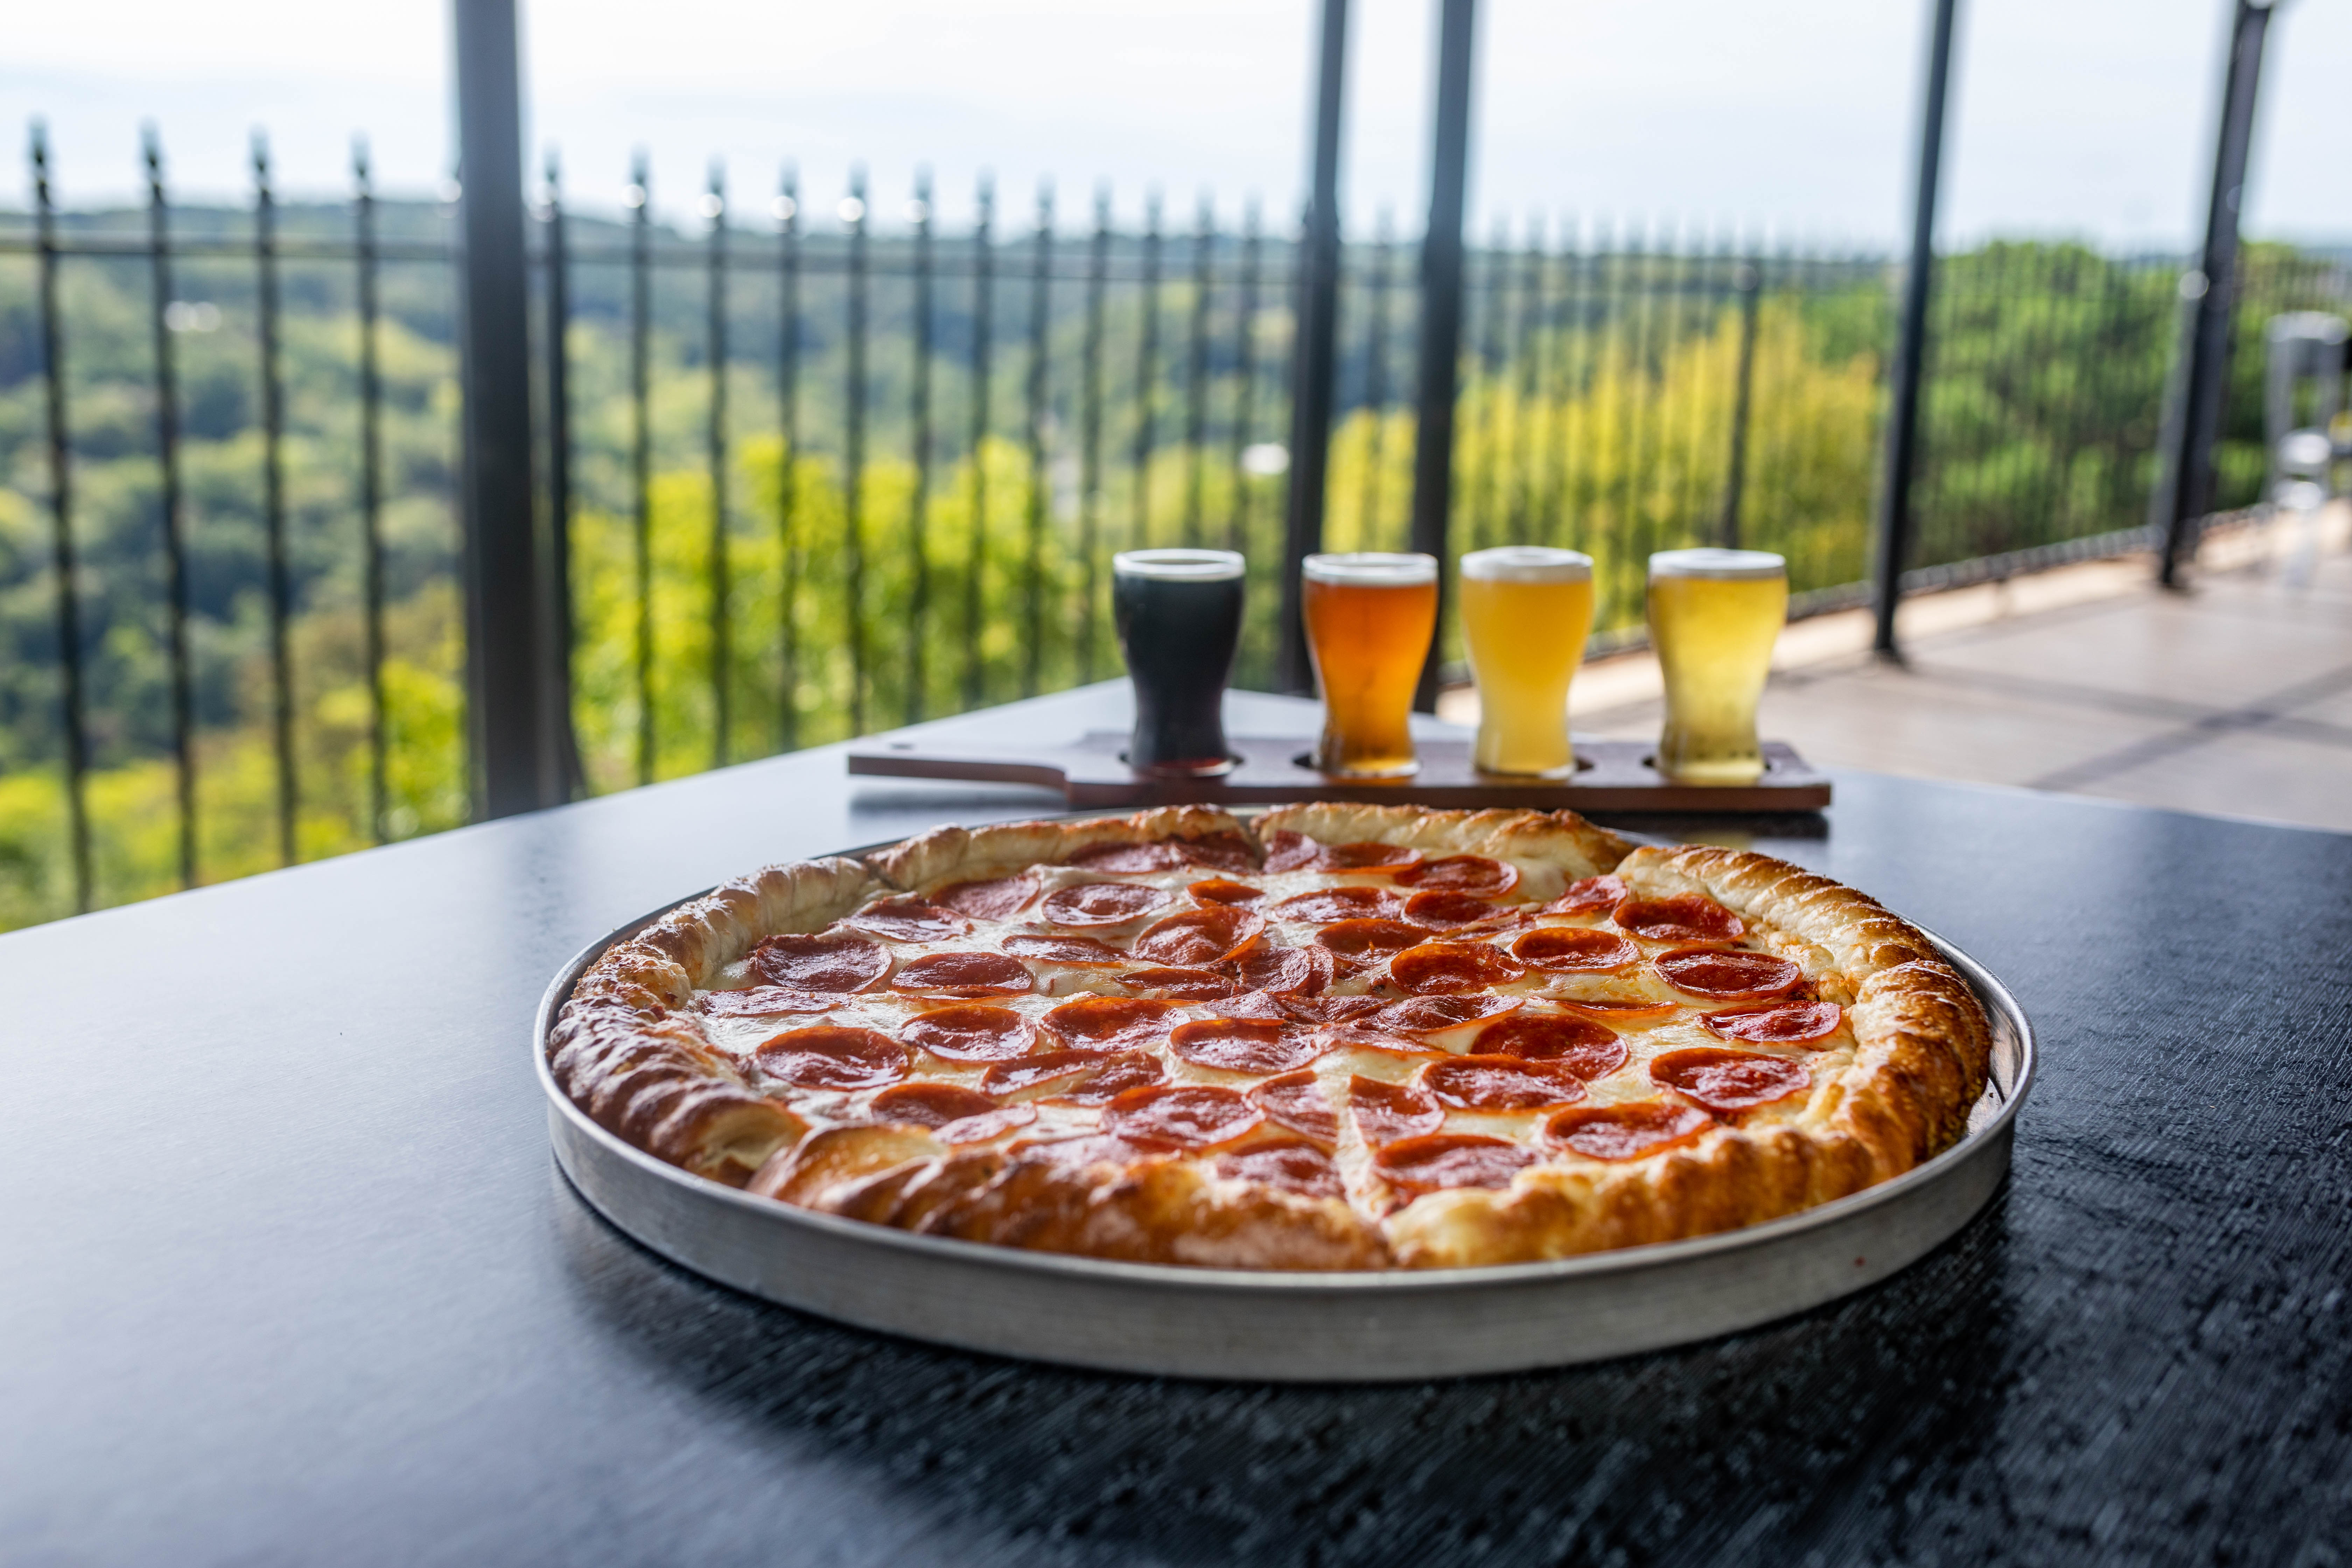 A pepperoni pizza and a flight of beers sit on a table on a balcony. Beyond the balcony are rolling, tree-covered hills